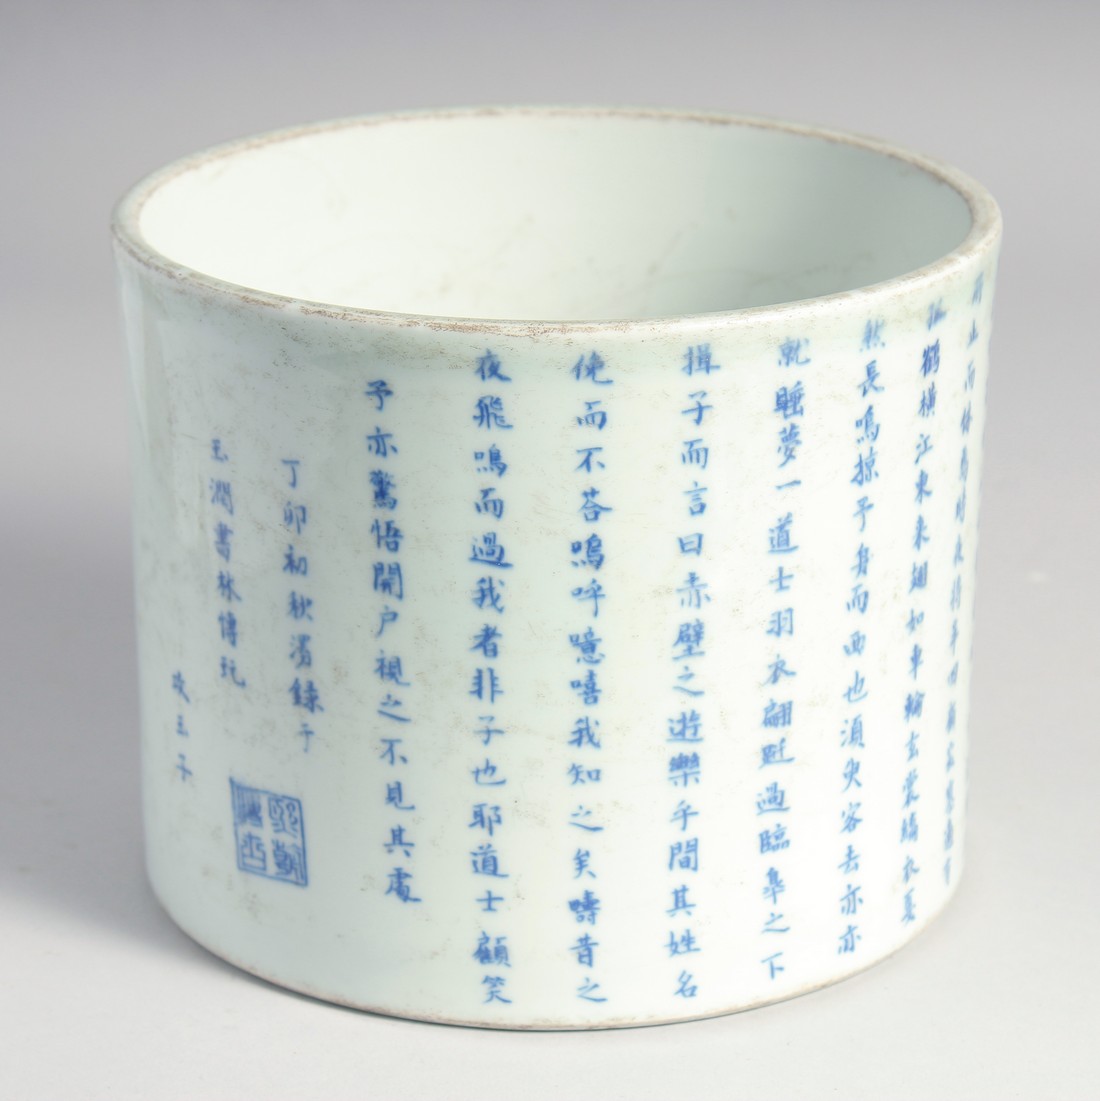 A LARGE CHINESE BLUE AND WHITE PORCELAIN BRUSH POT, the exterior with rows of characters, the base - Image 3 of 7